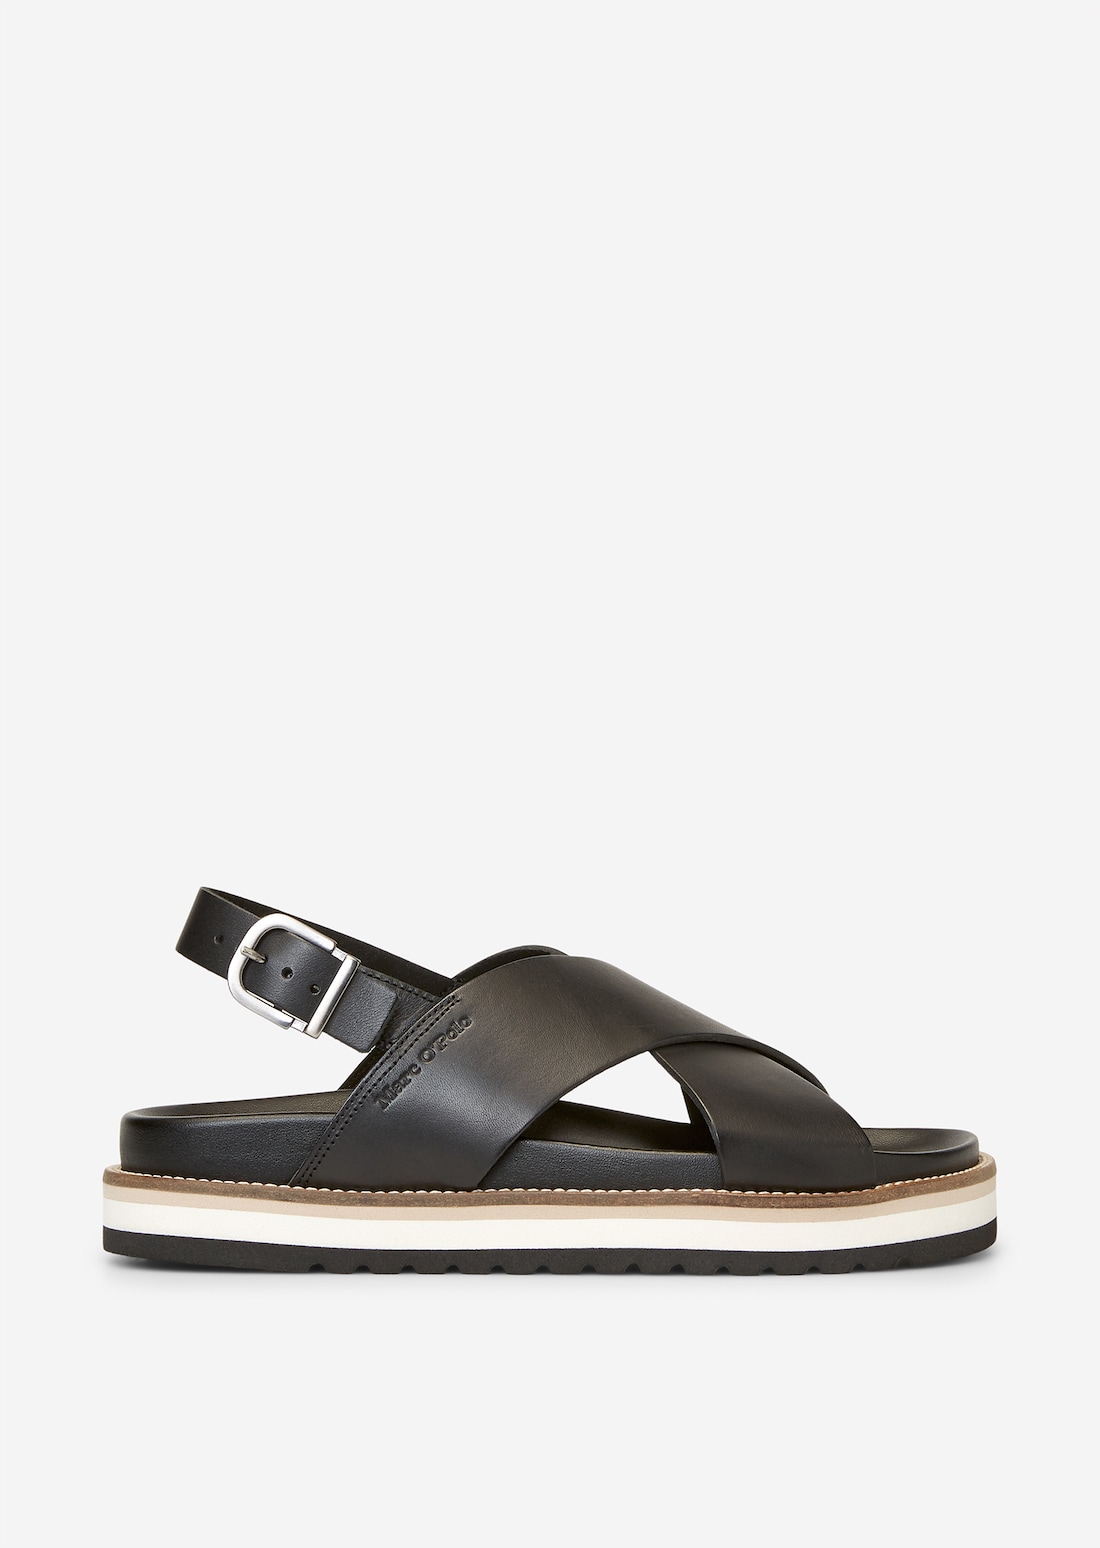 Sandal made from high-quality cowhide - black | Sandals | MARC O’POLO